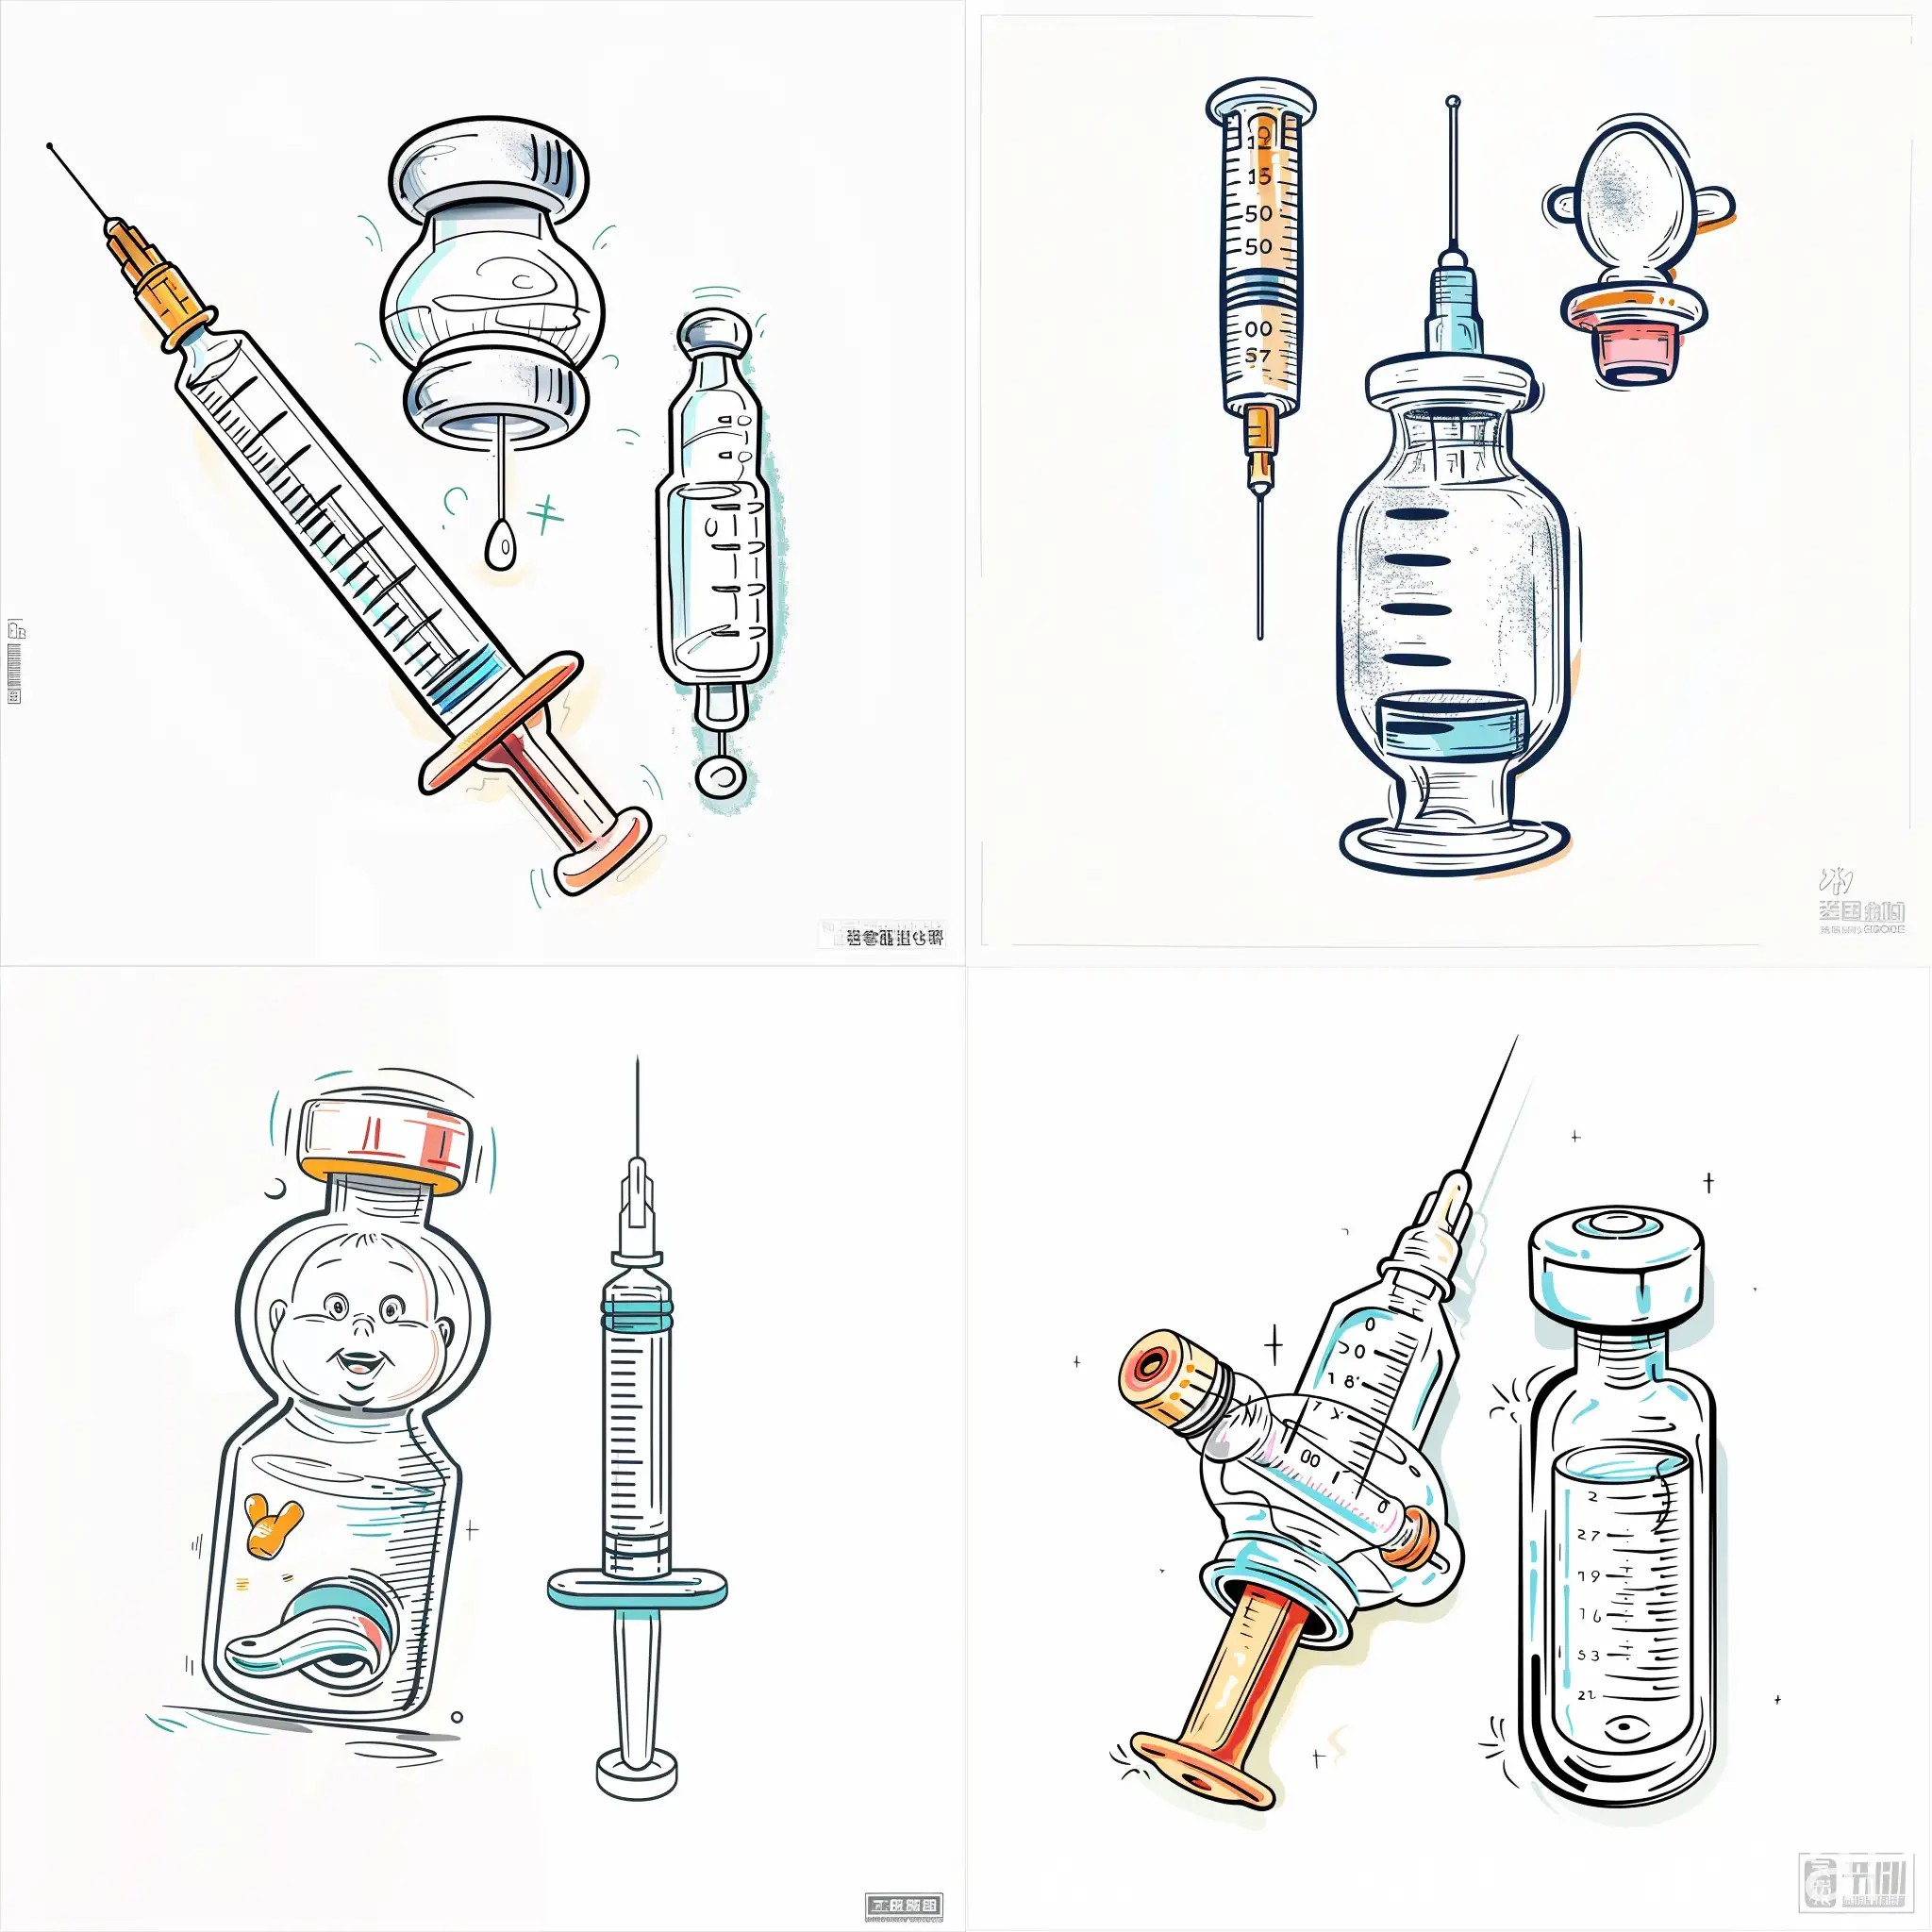 NeedleShaped-Pacifier-and-Bottle-Design-to-Reduce-Childrens-Fear-of-Needles